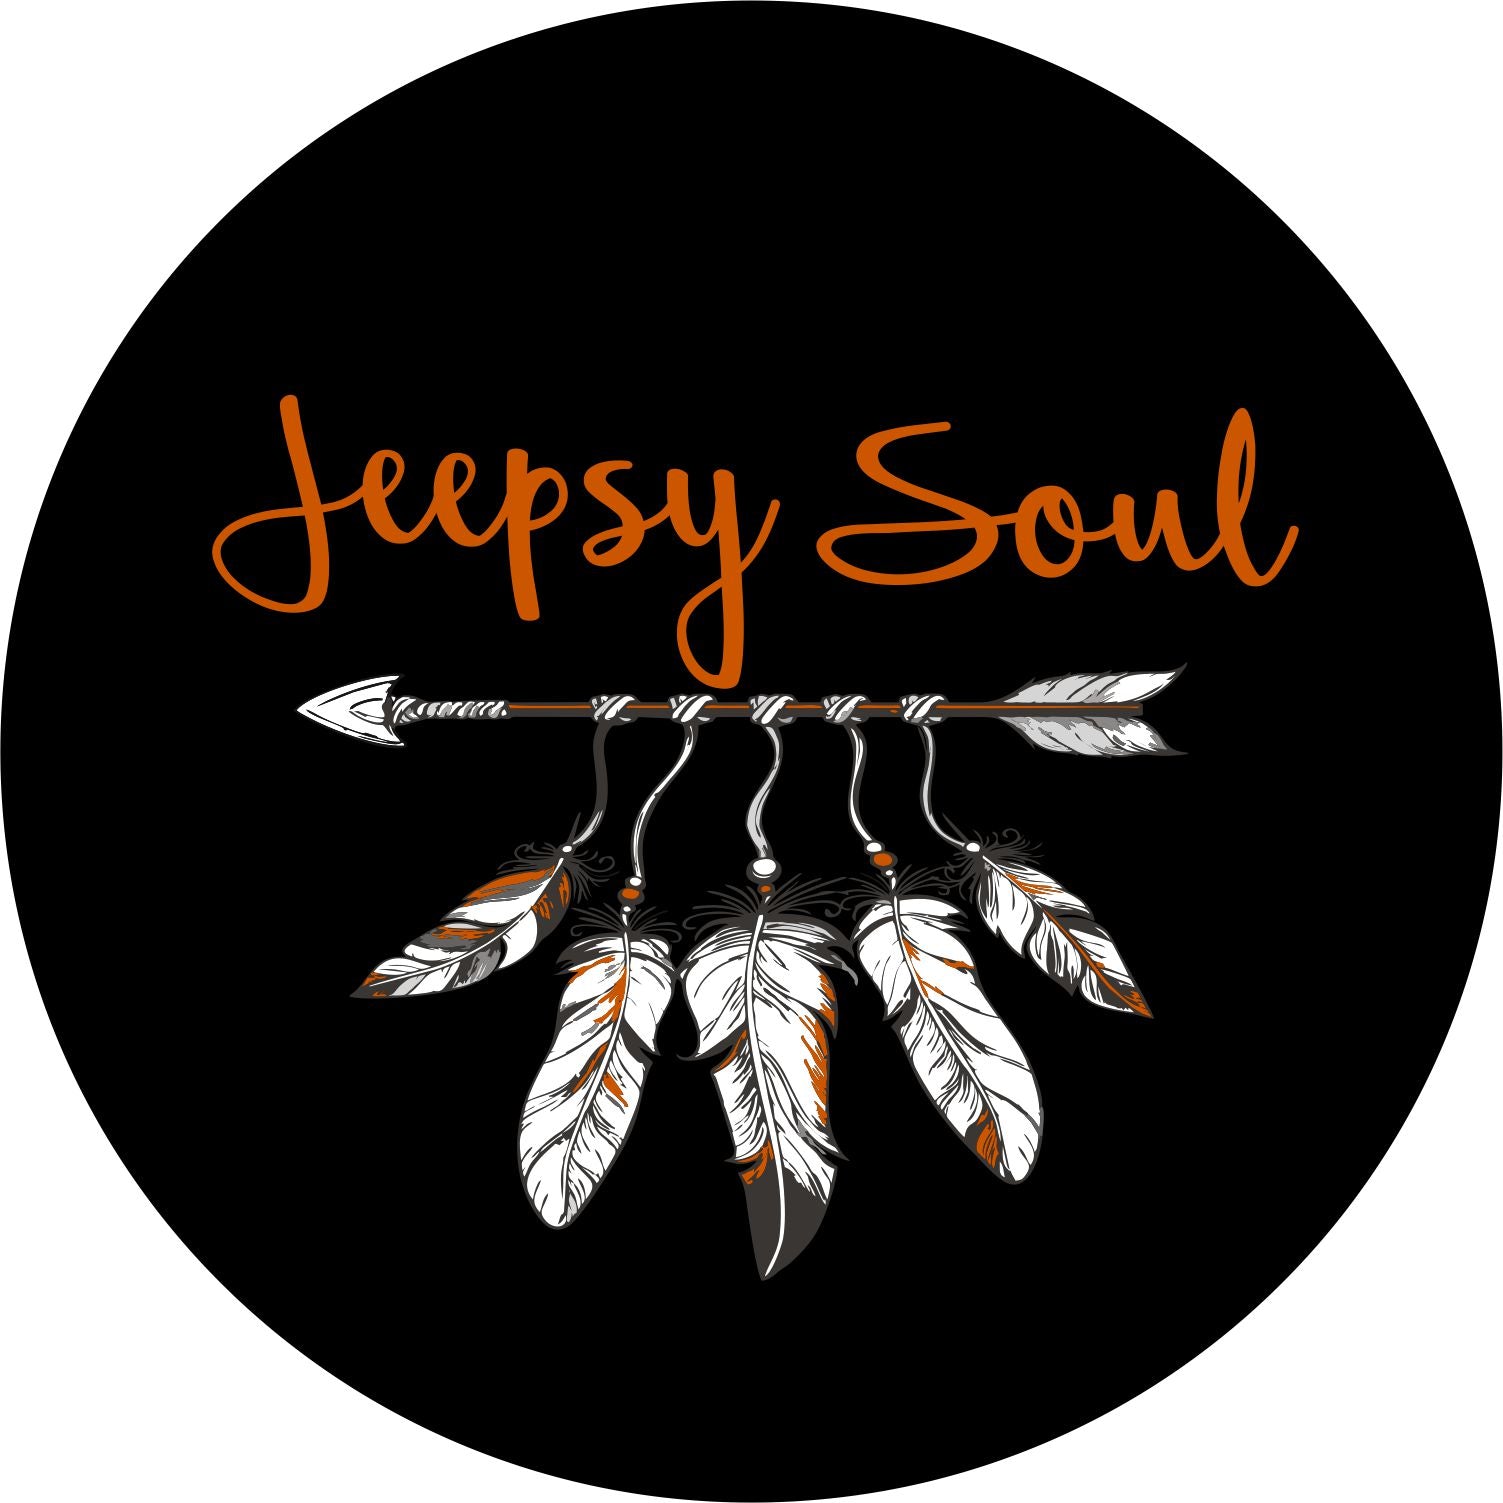 Jeepsy Soul with an Arrow and feather spare tire cover for Jeep design in orange